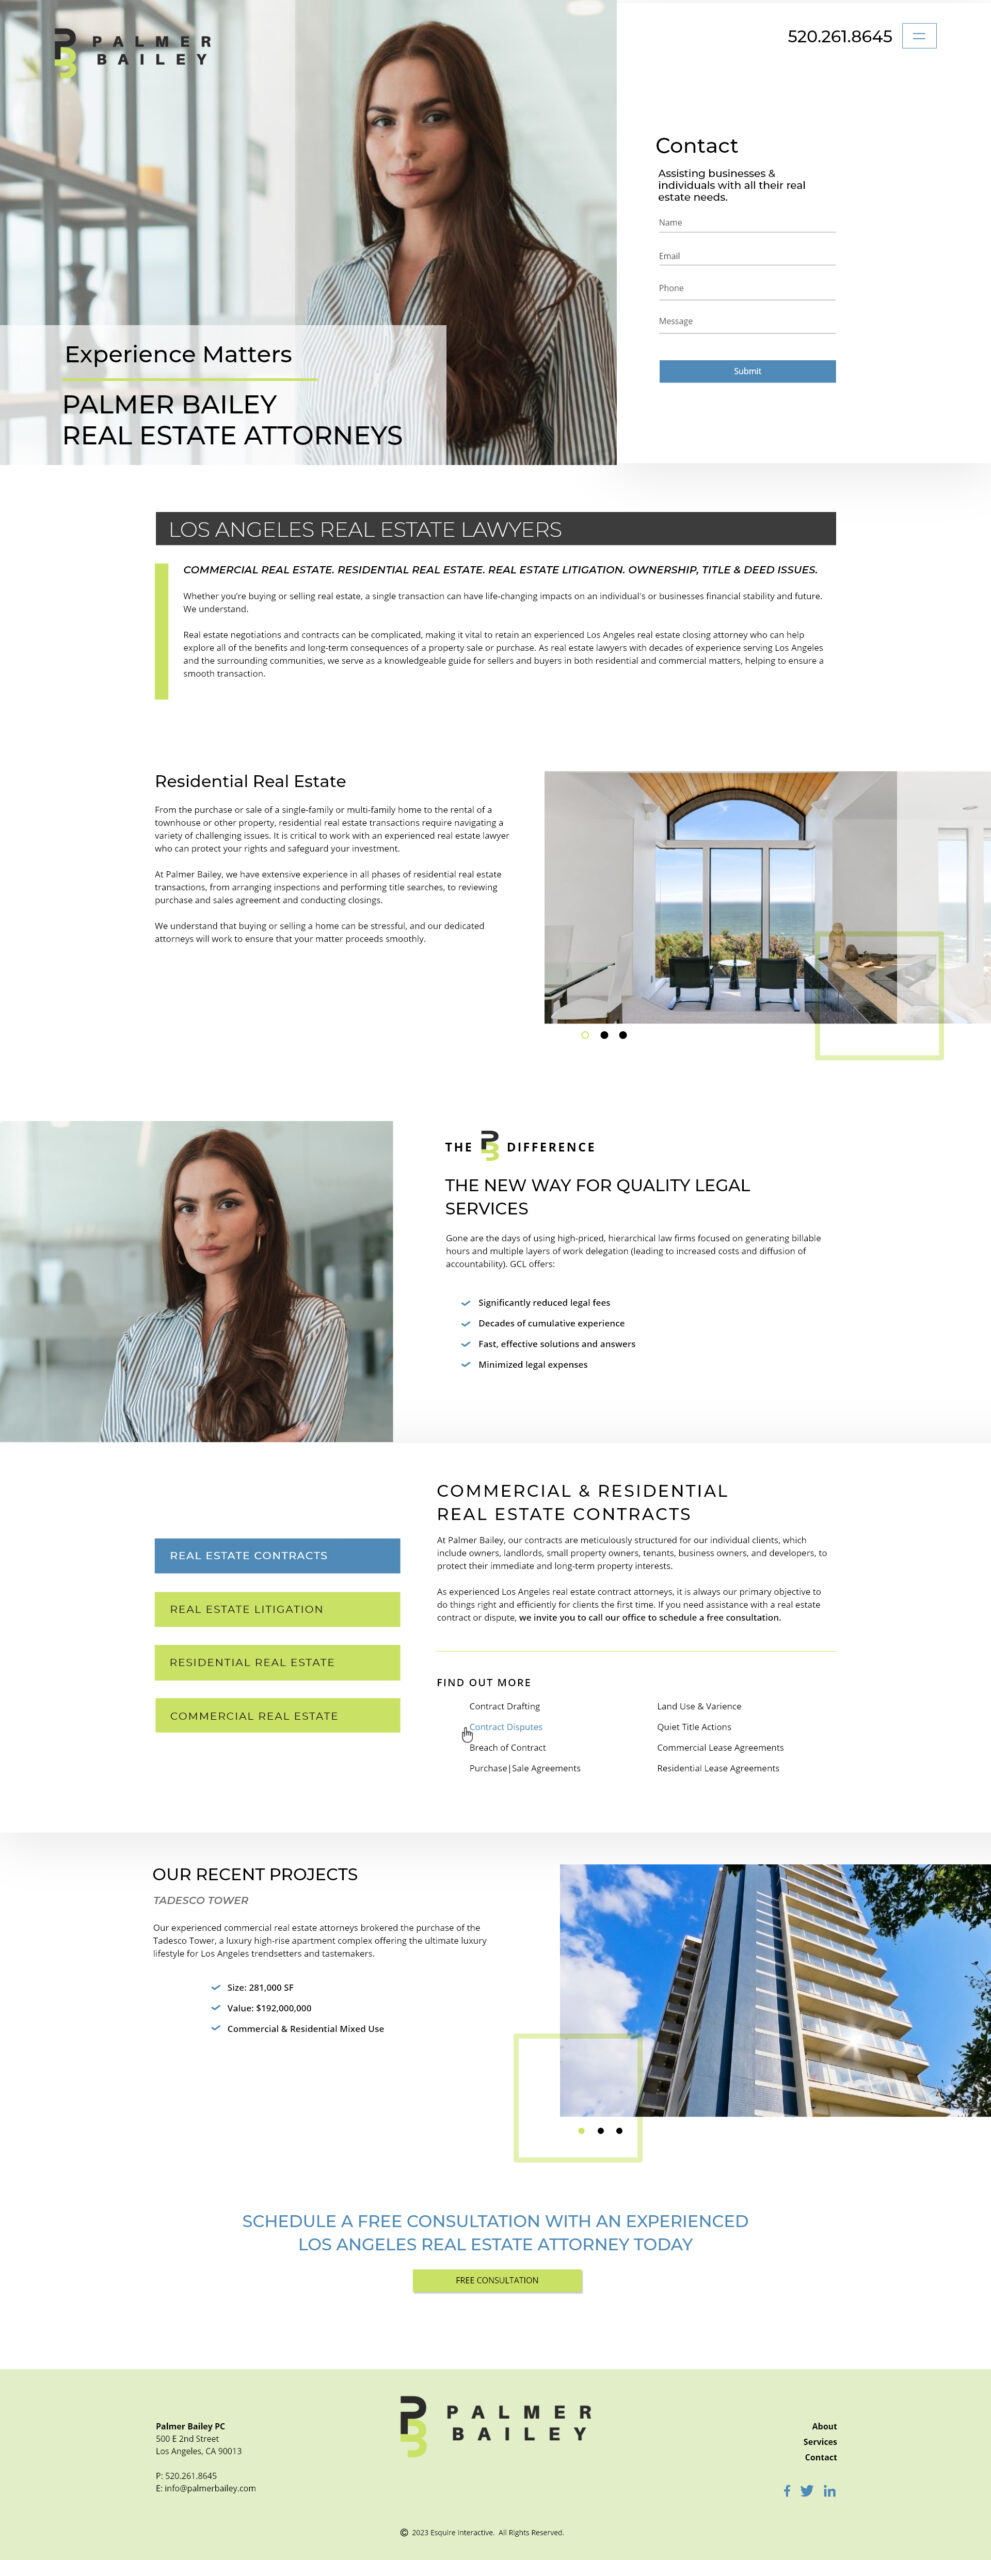 Palmer Bailey Website Template Home Page